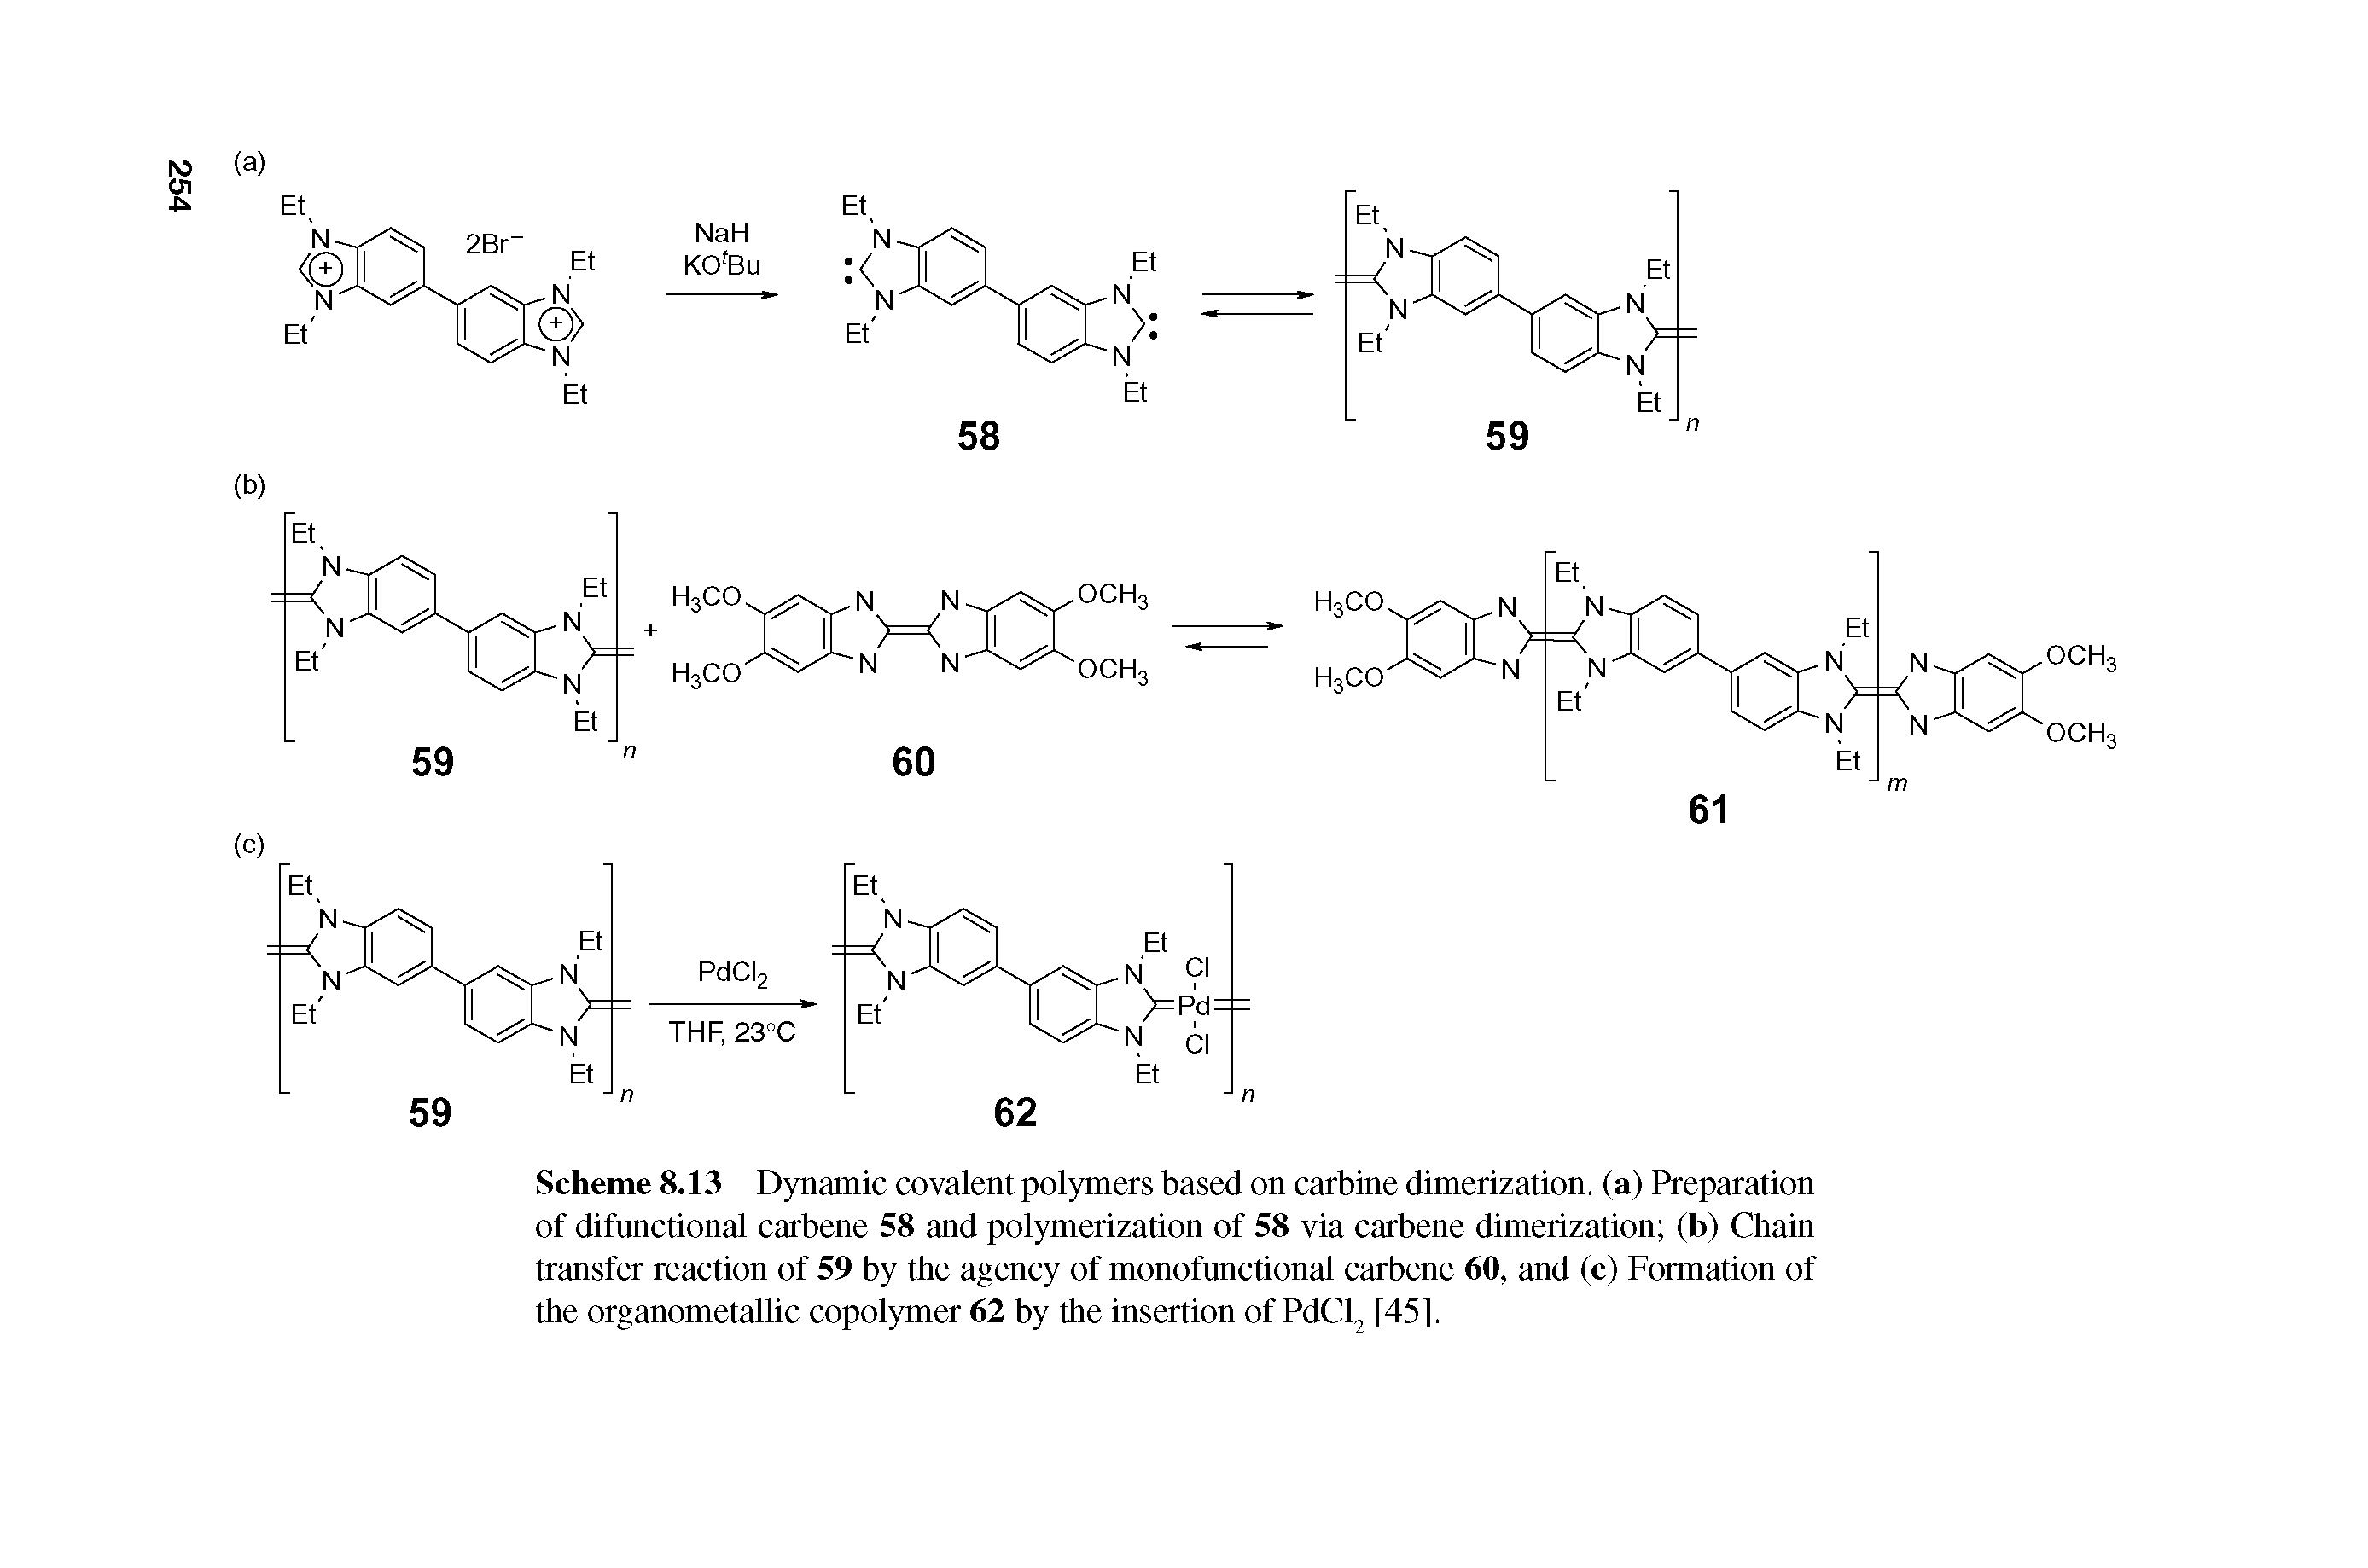 Scheme 8.13 Dynamic covalent polymers based on carbine dimerization, (a) Preparation of difnnctional carbene 58 and polymerization of 58 via carbene dimerization (b) Chain transfer reaction of 59 by the agency of monofnnctional carbene 60, and (c) Formation of the organometallic copolymer 62 by the insertion of PdCl [45],...